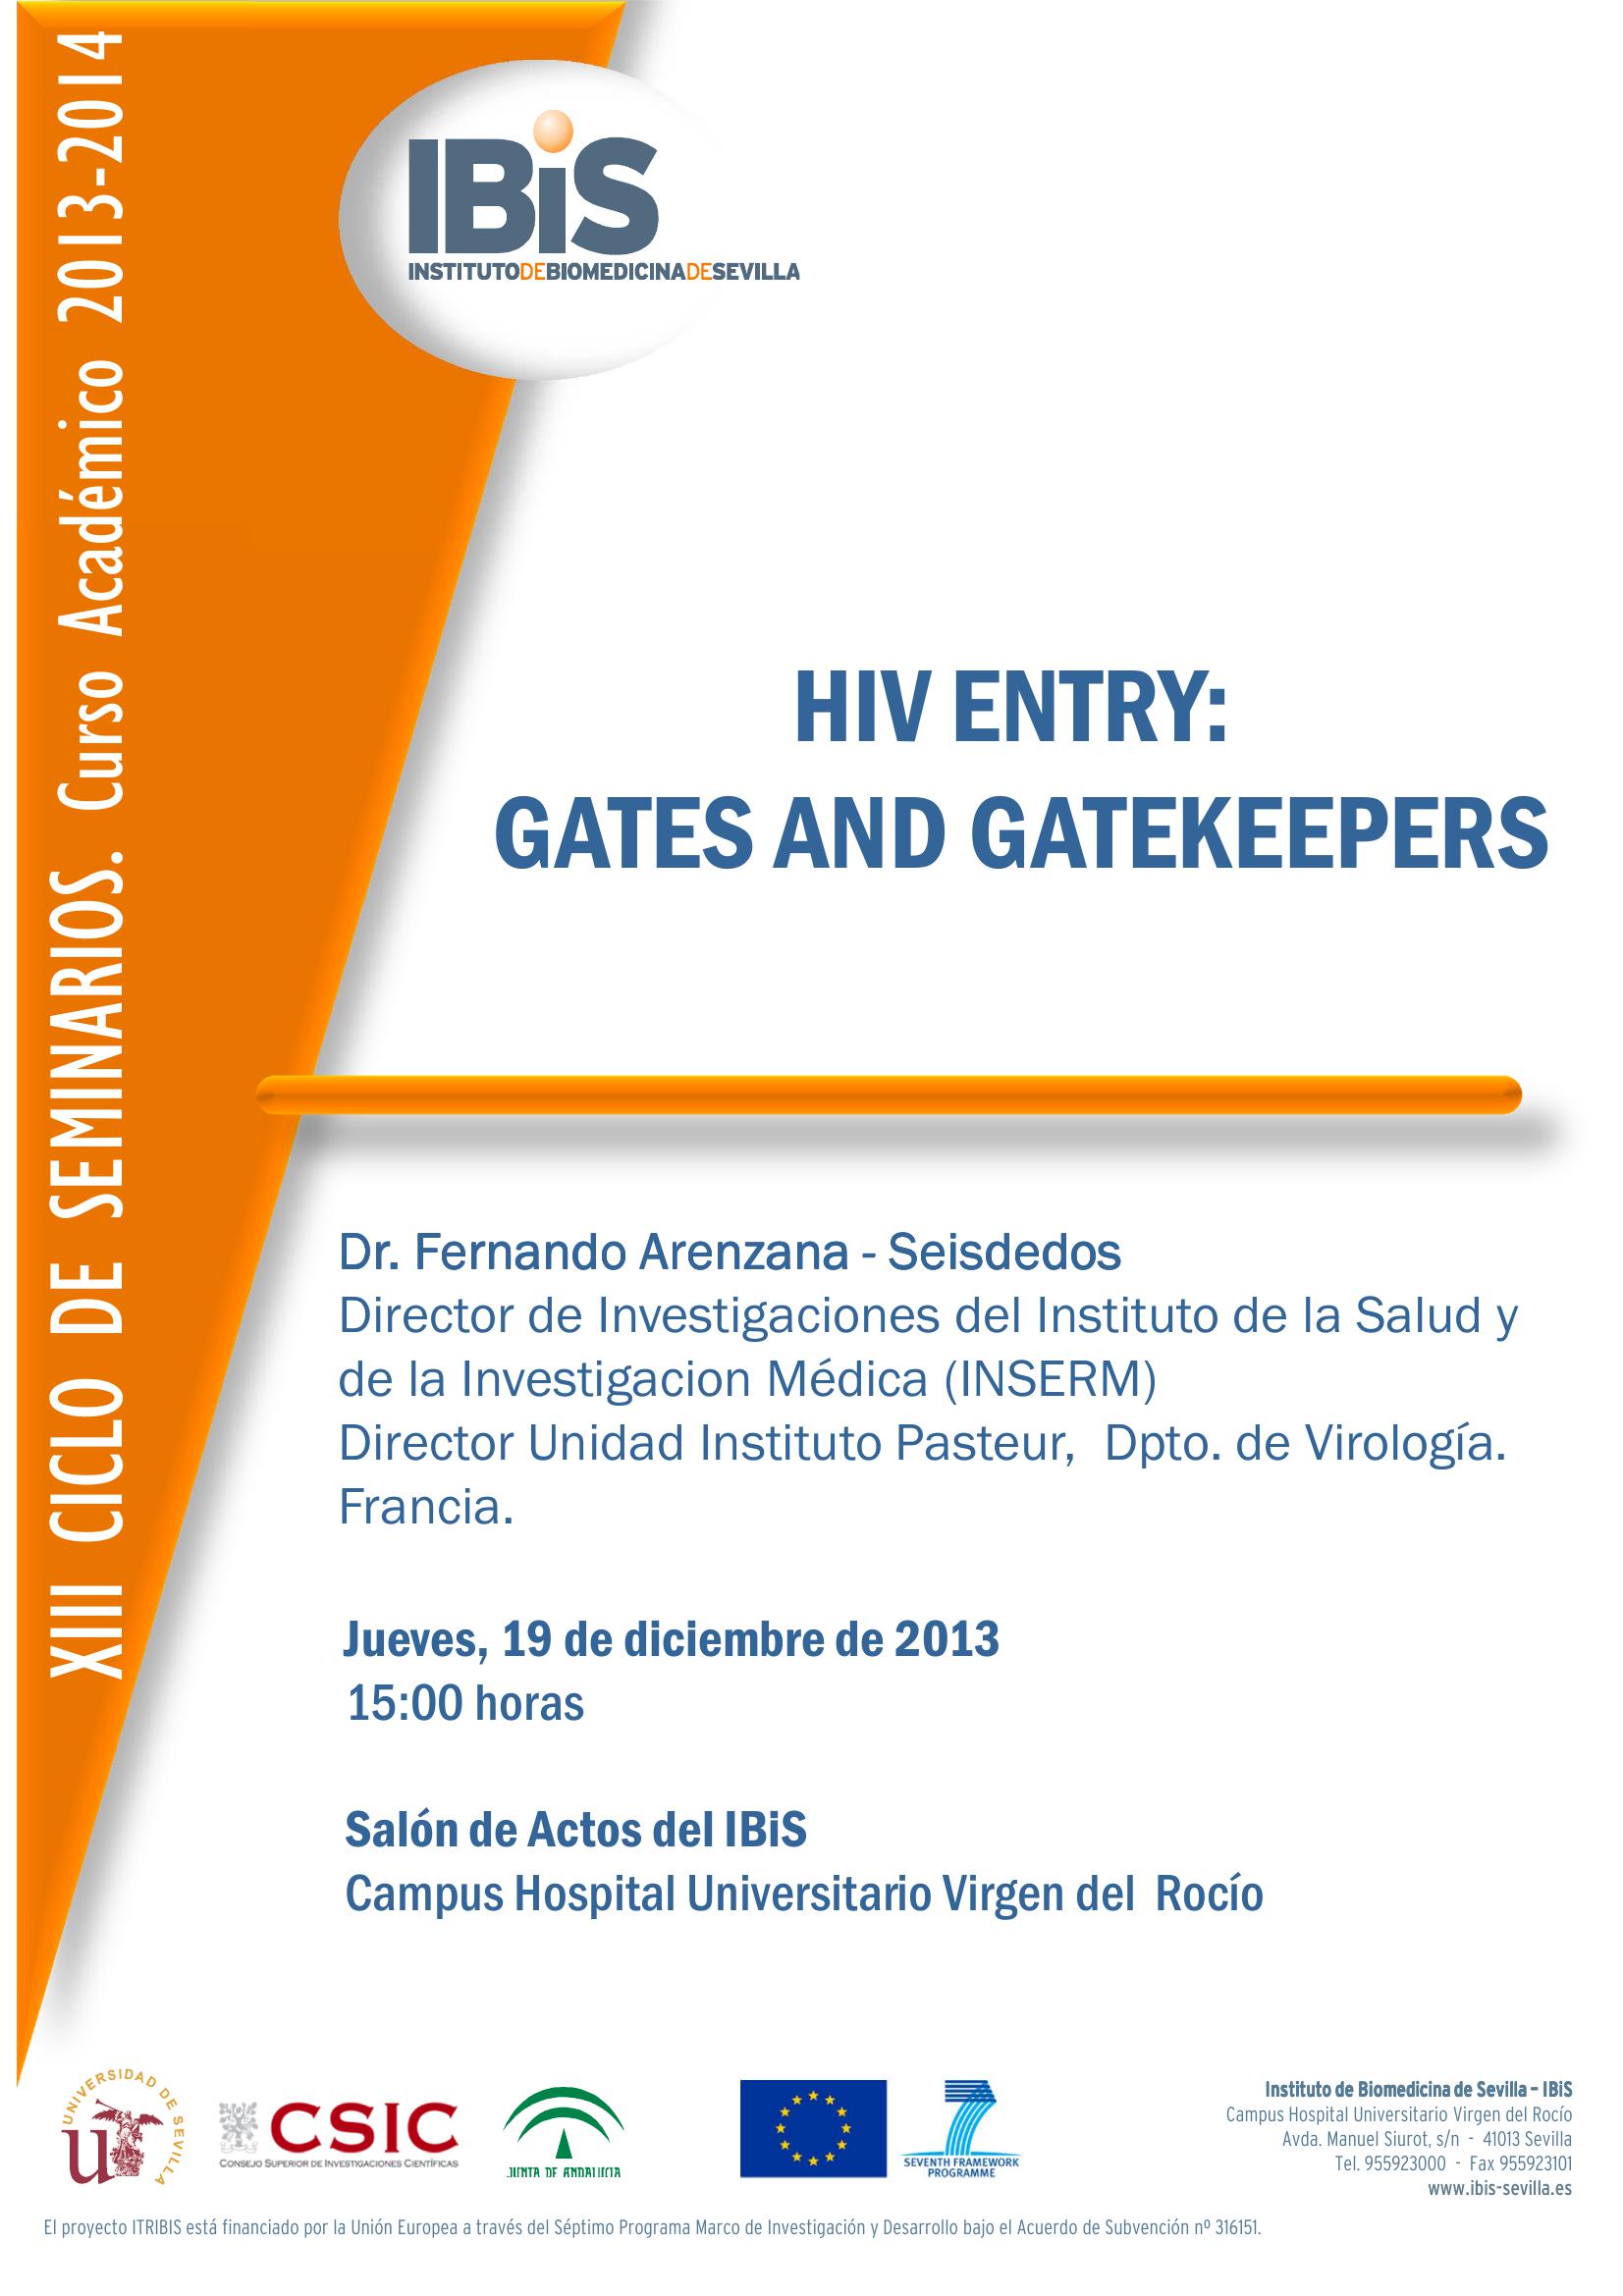 Poster: HIV ENTRY: GATES AND GATEKEEPERS